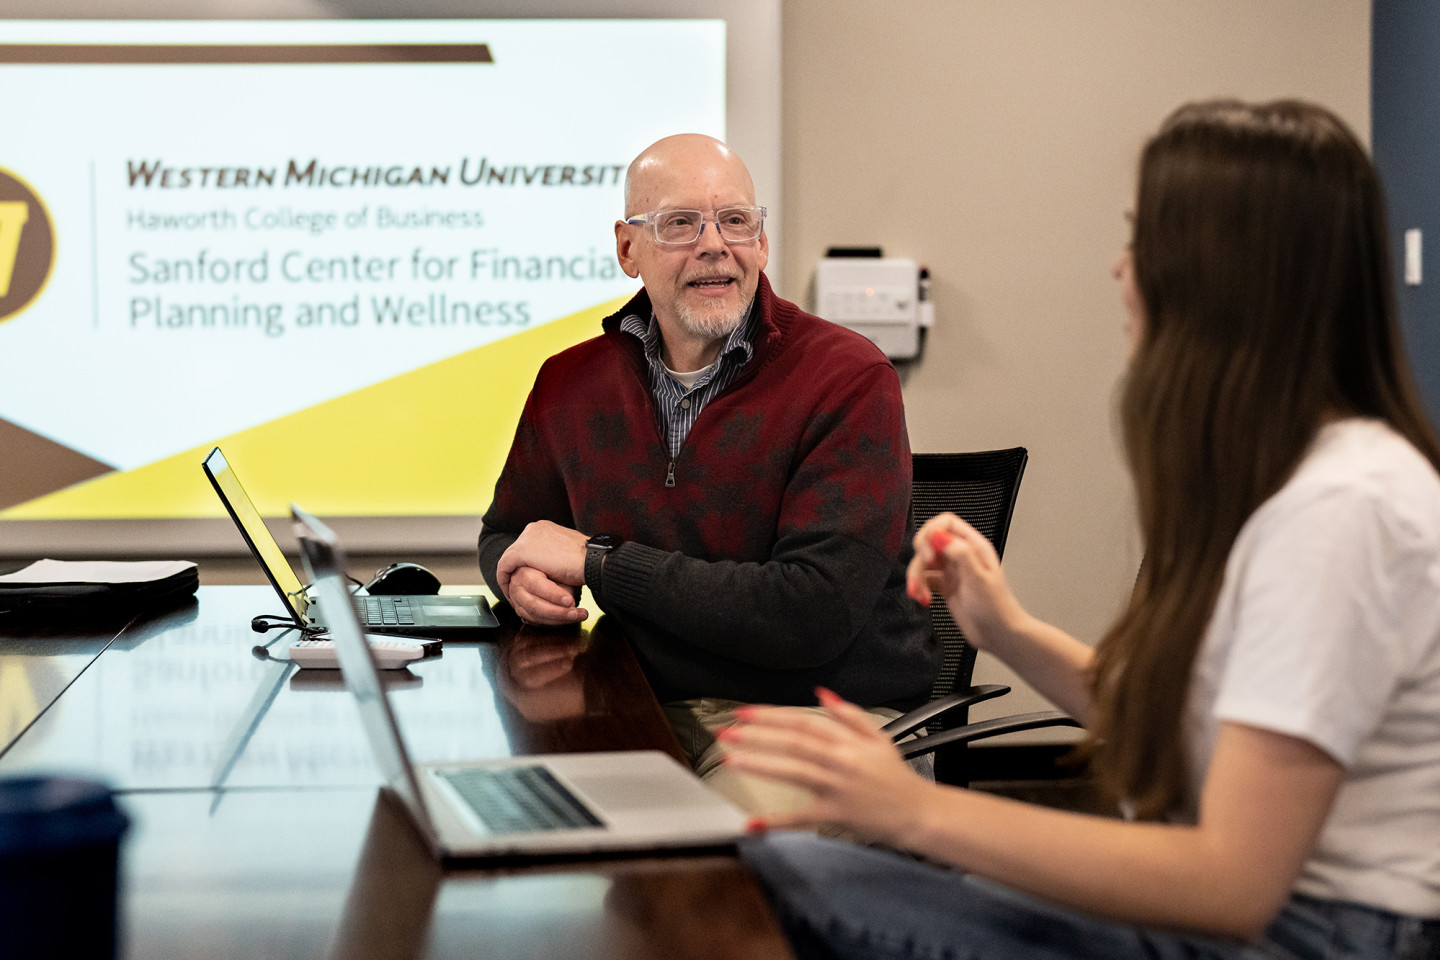 Todd Mora, seated at a table with a student in the Sanford Center for Financial Planning and Wellness